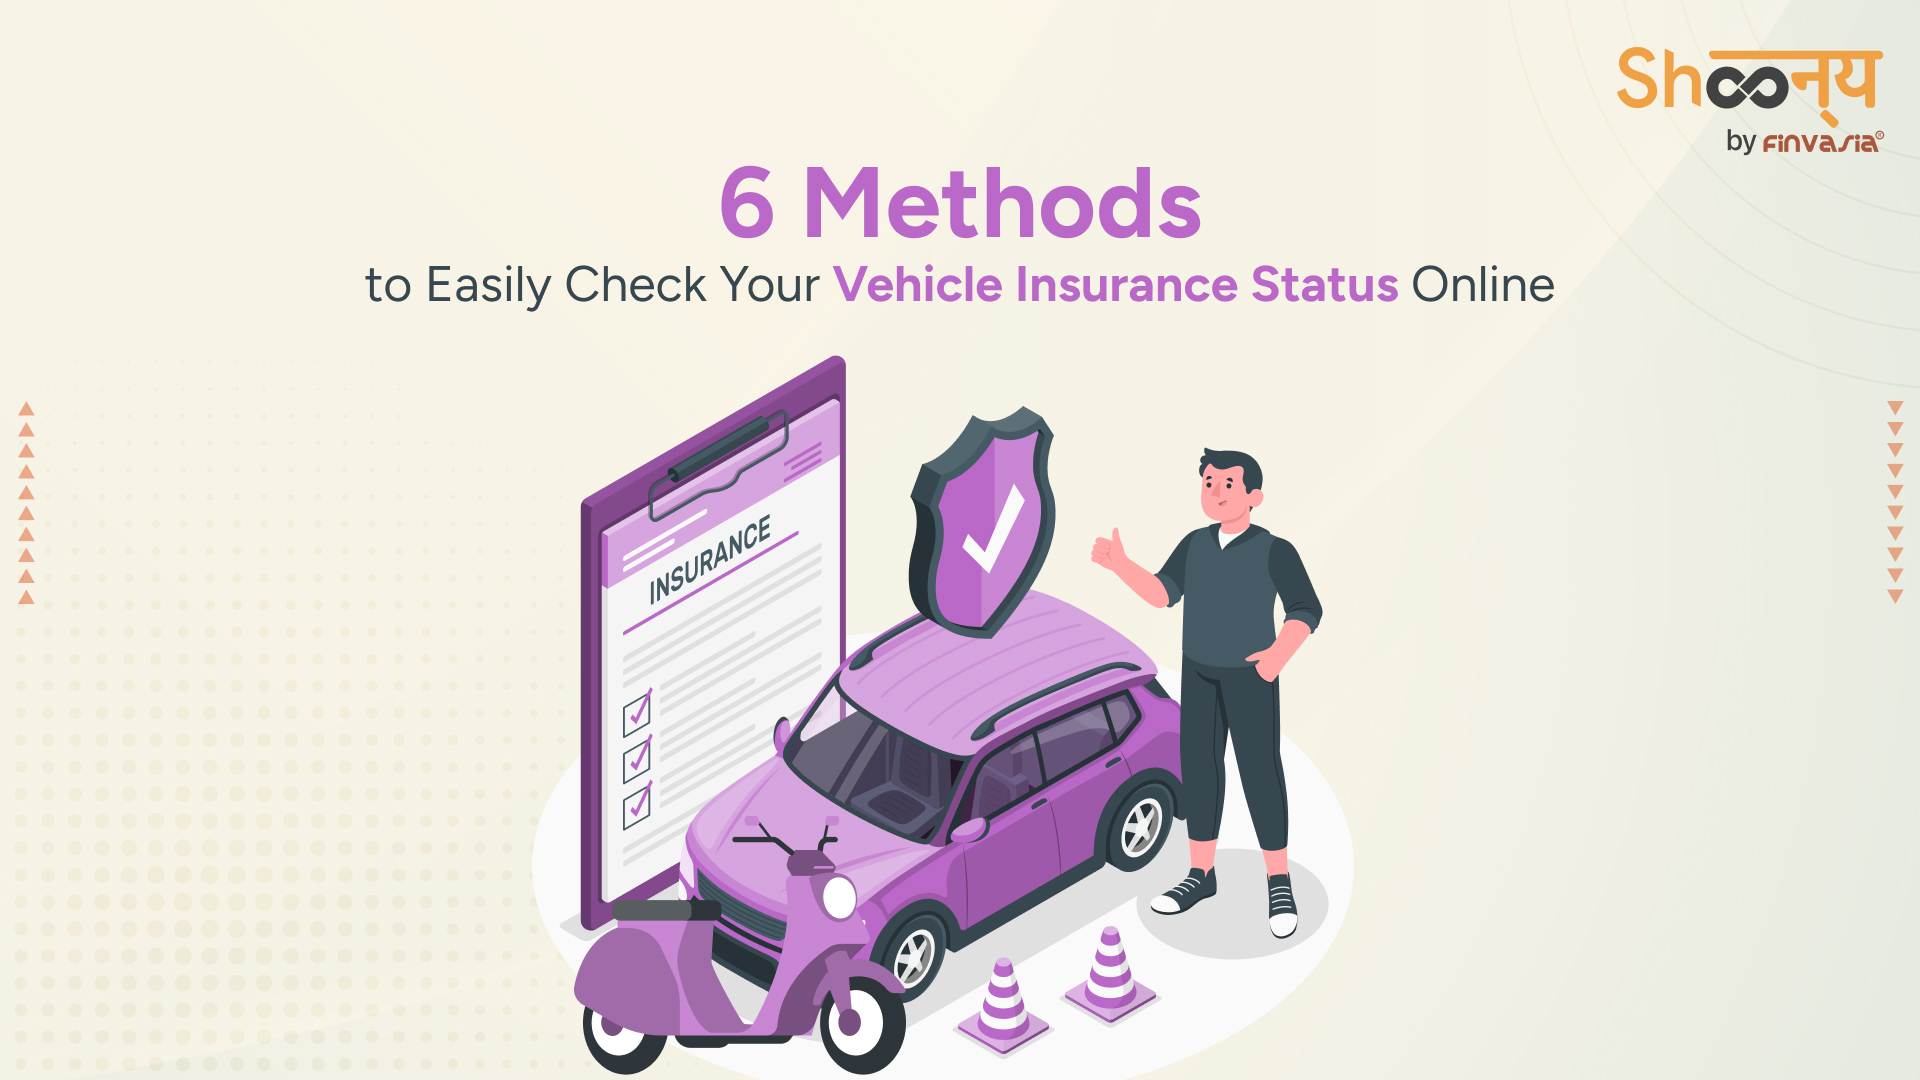 6 Methods to Easily Check Your Vehicle Insurance Status Online